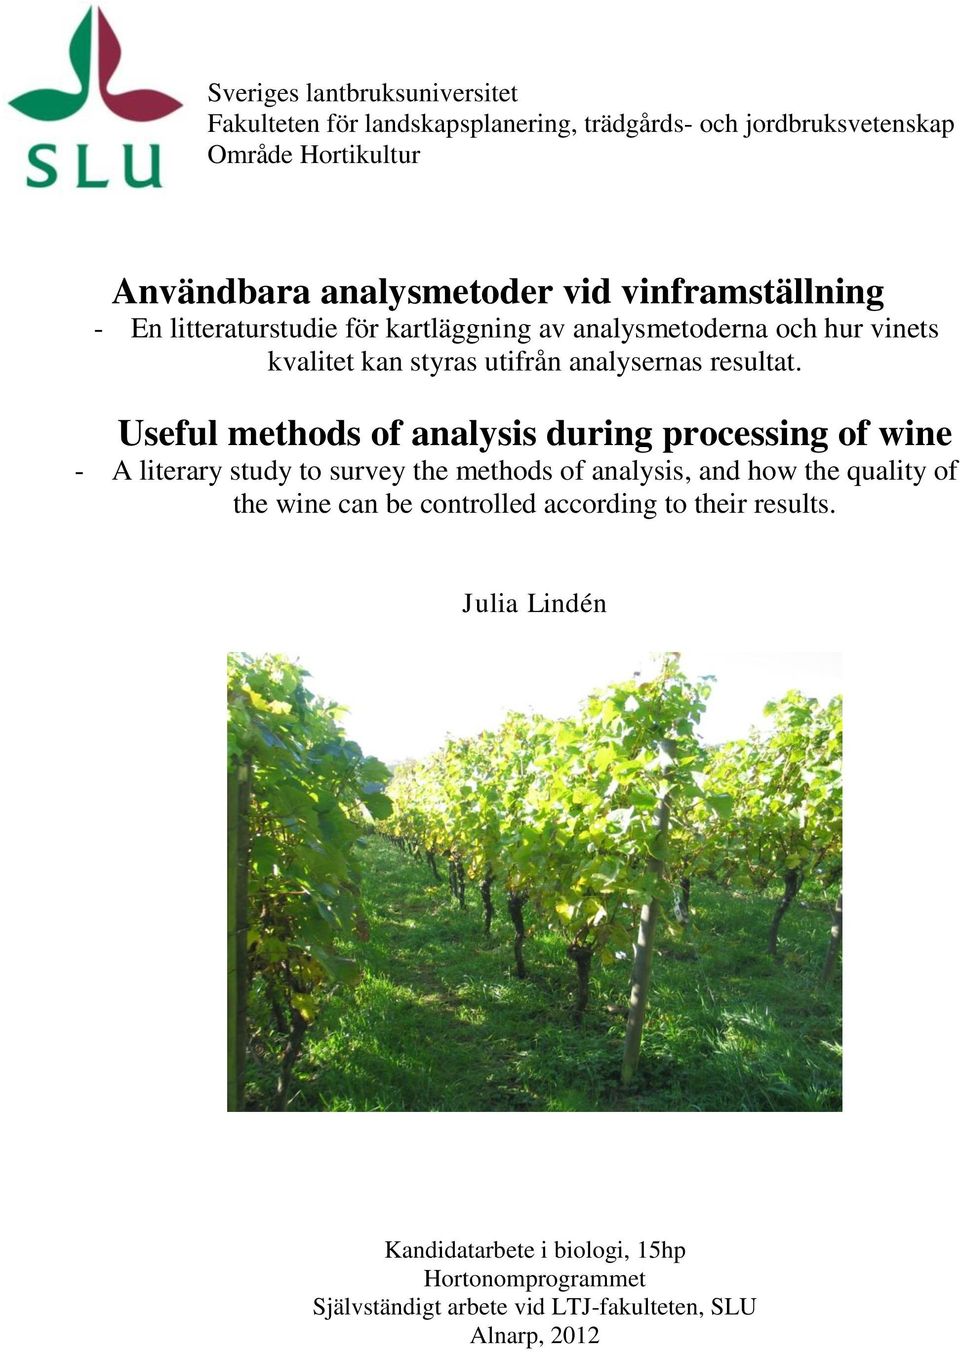 Useful methods of analysis during processing of wine - A literary study to survey the methods of analysis, and how the quality of the wine can be